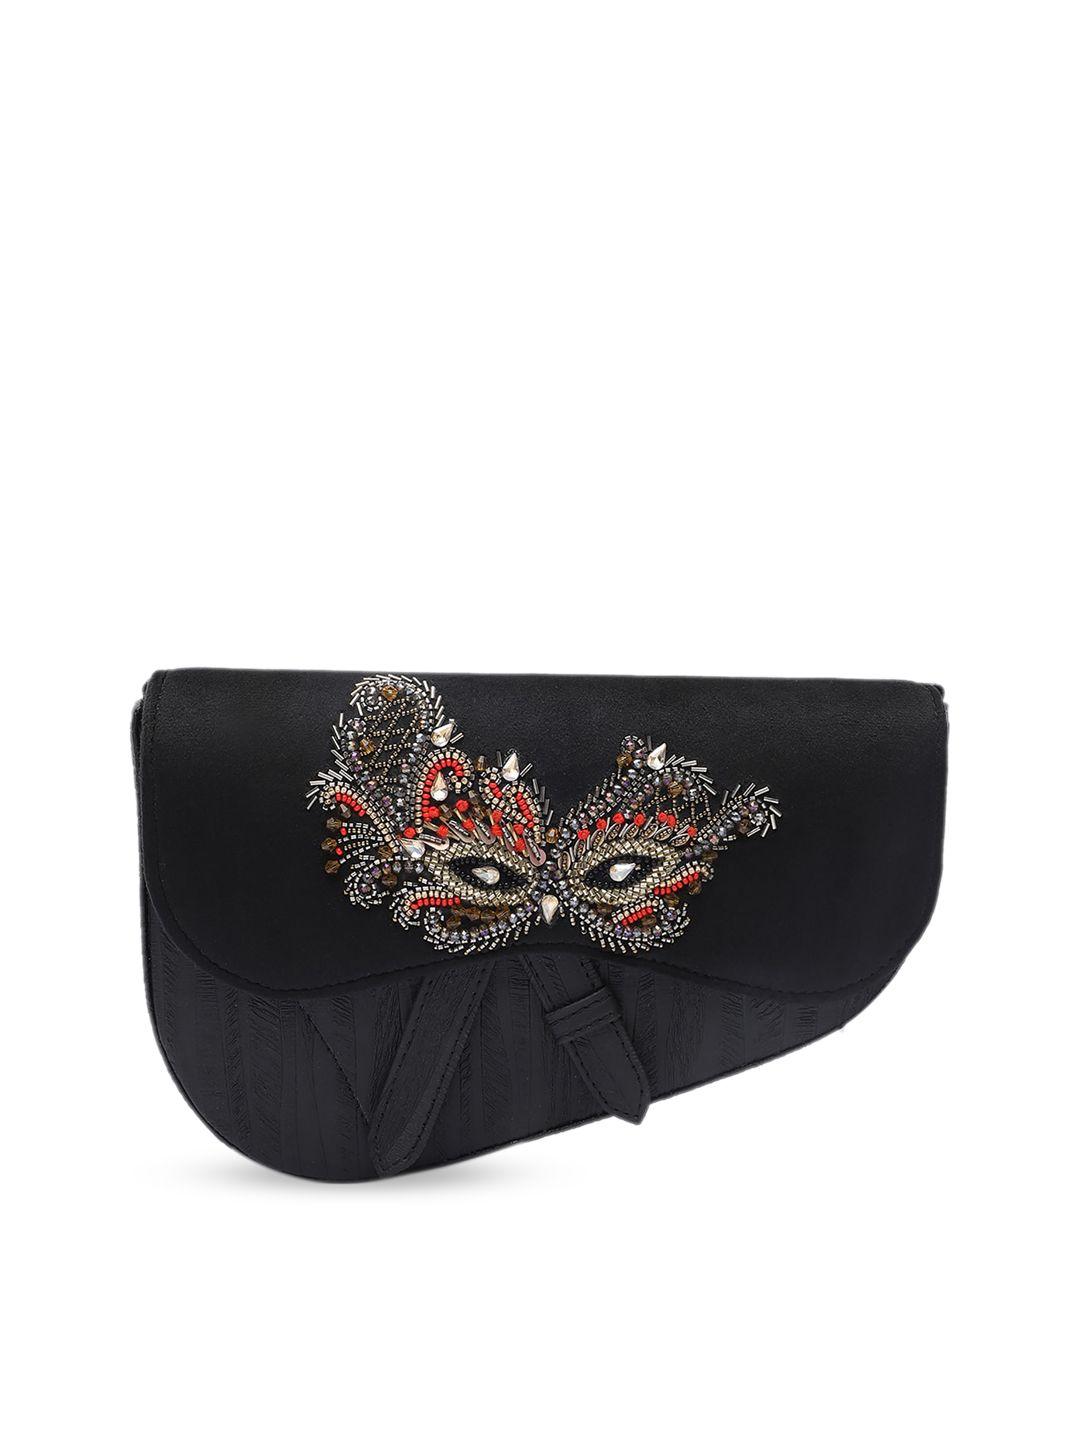 clotche geometric embellished leather half moon sling bag with bow detail